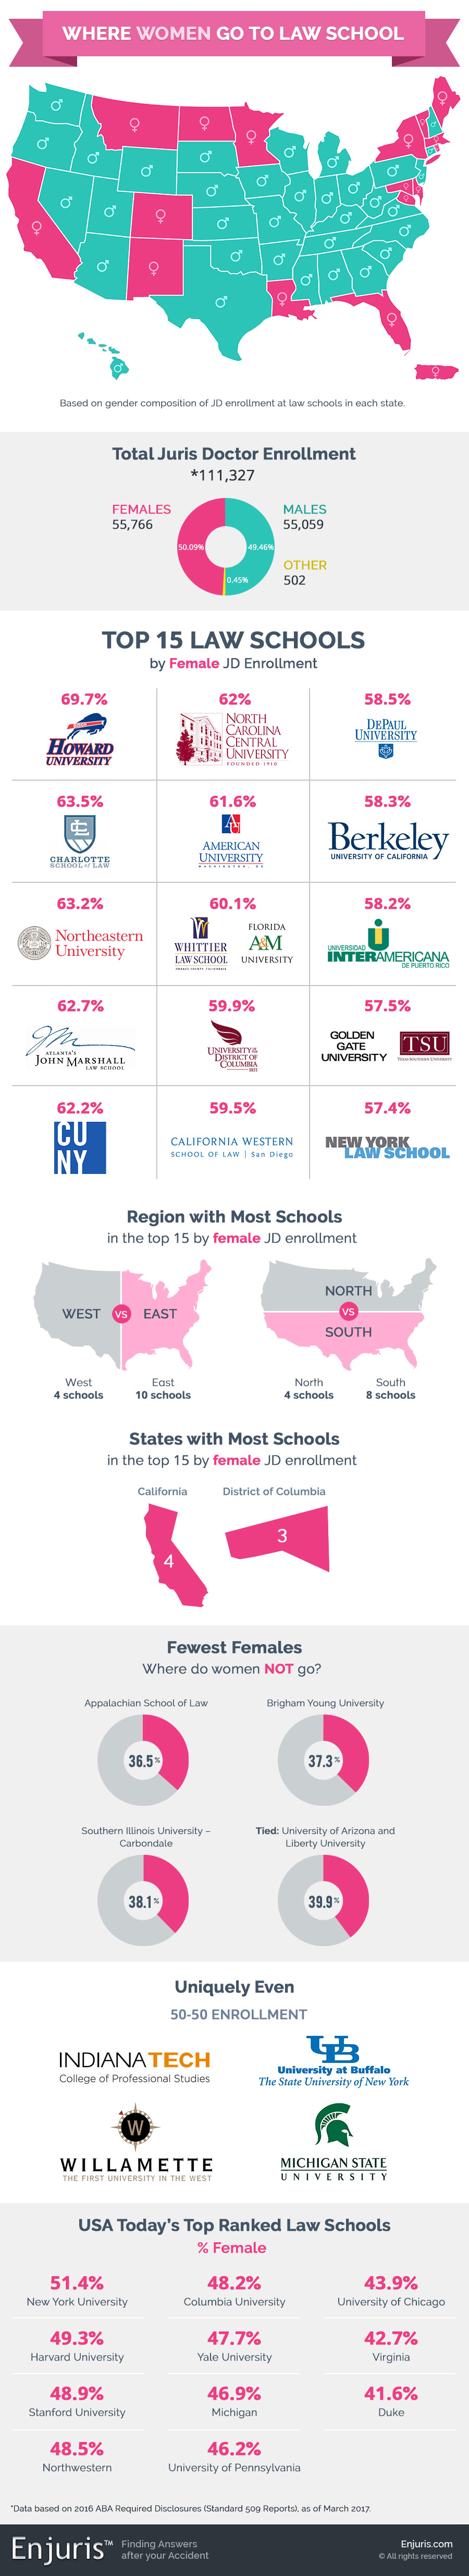 Where do women go to law school? Find out!